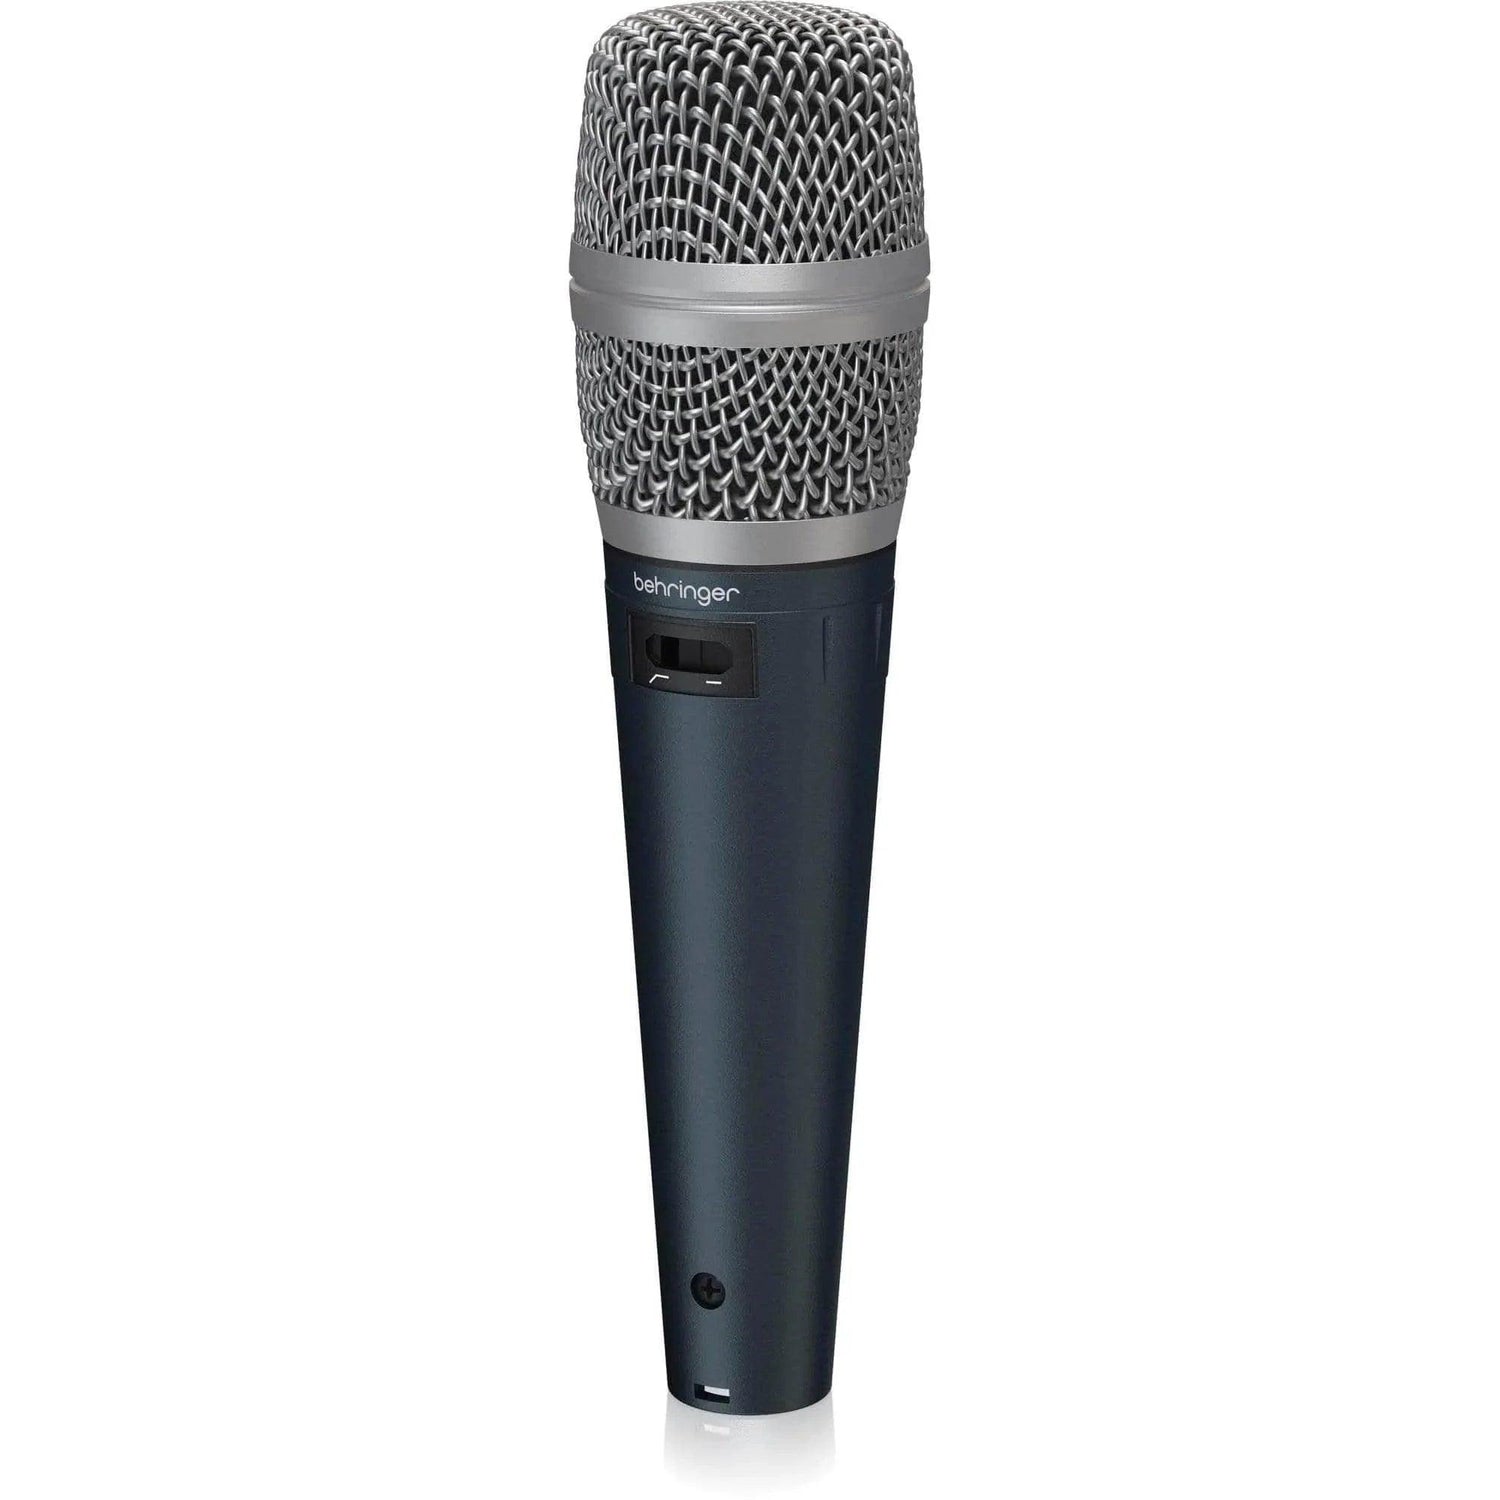 Behringer SB78A Cardioid Condenser Microphone